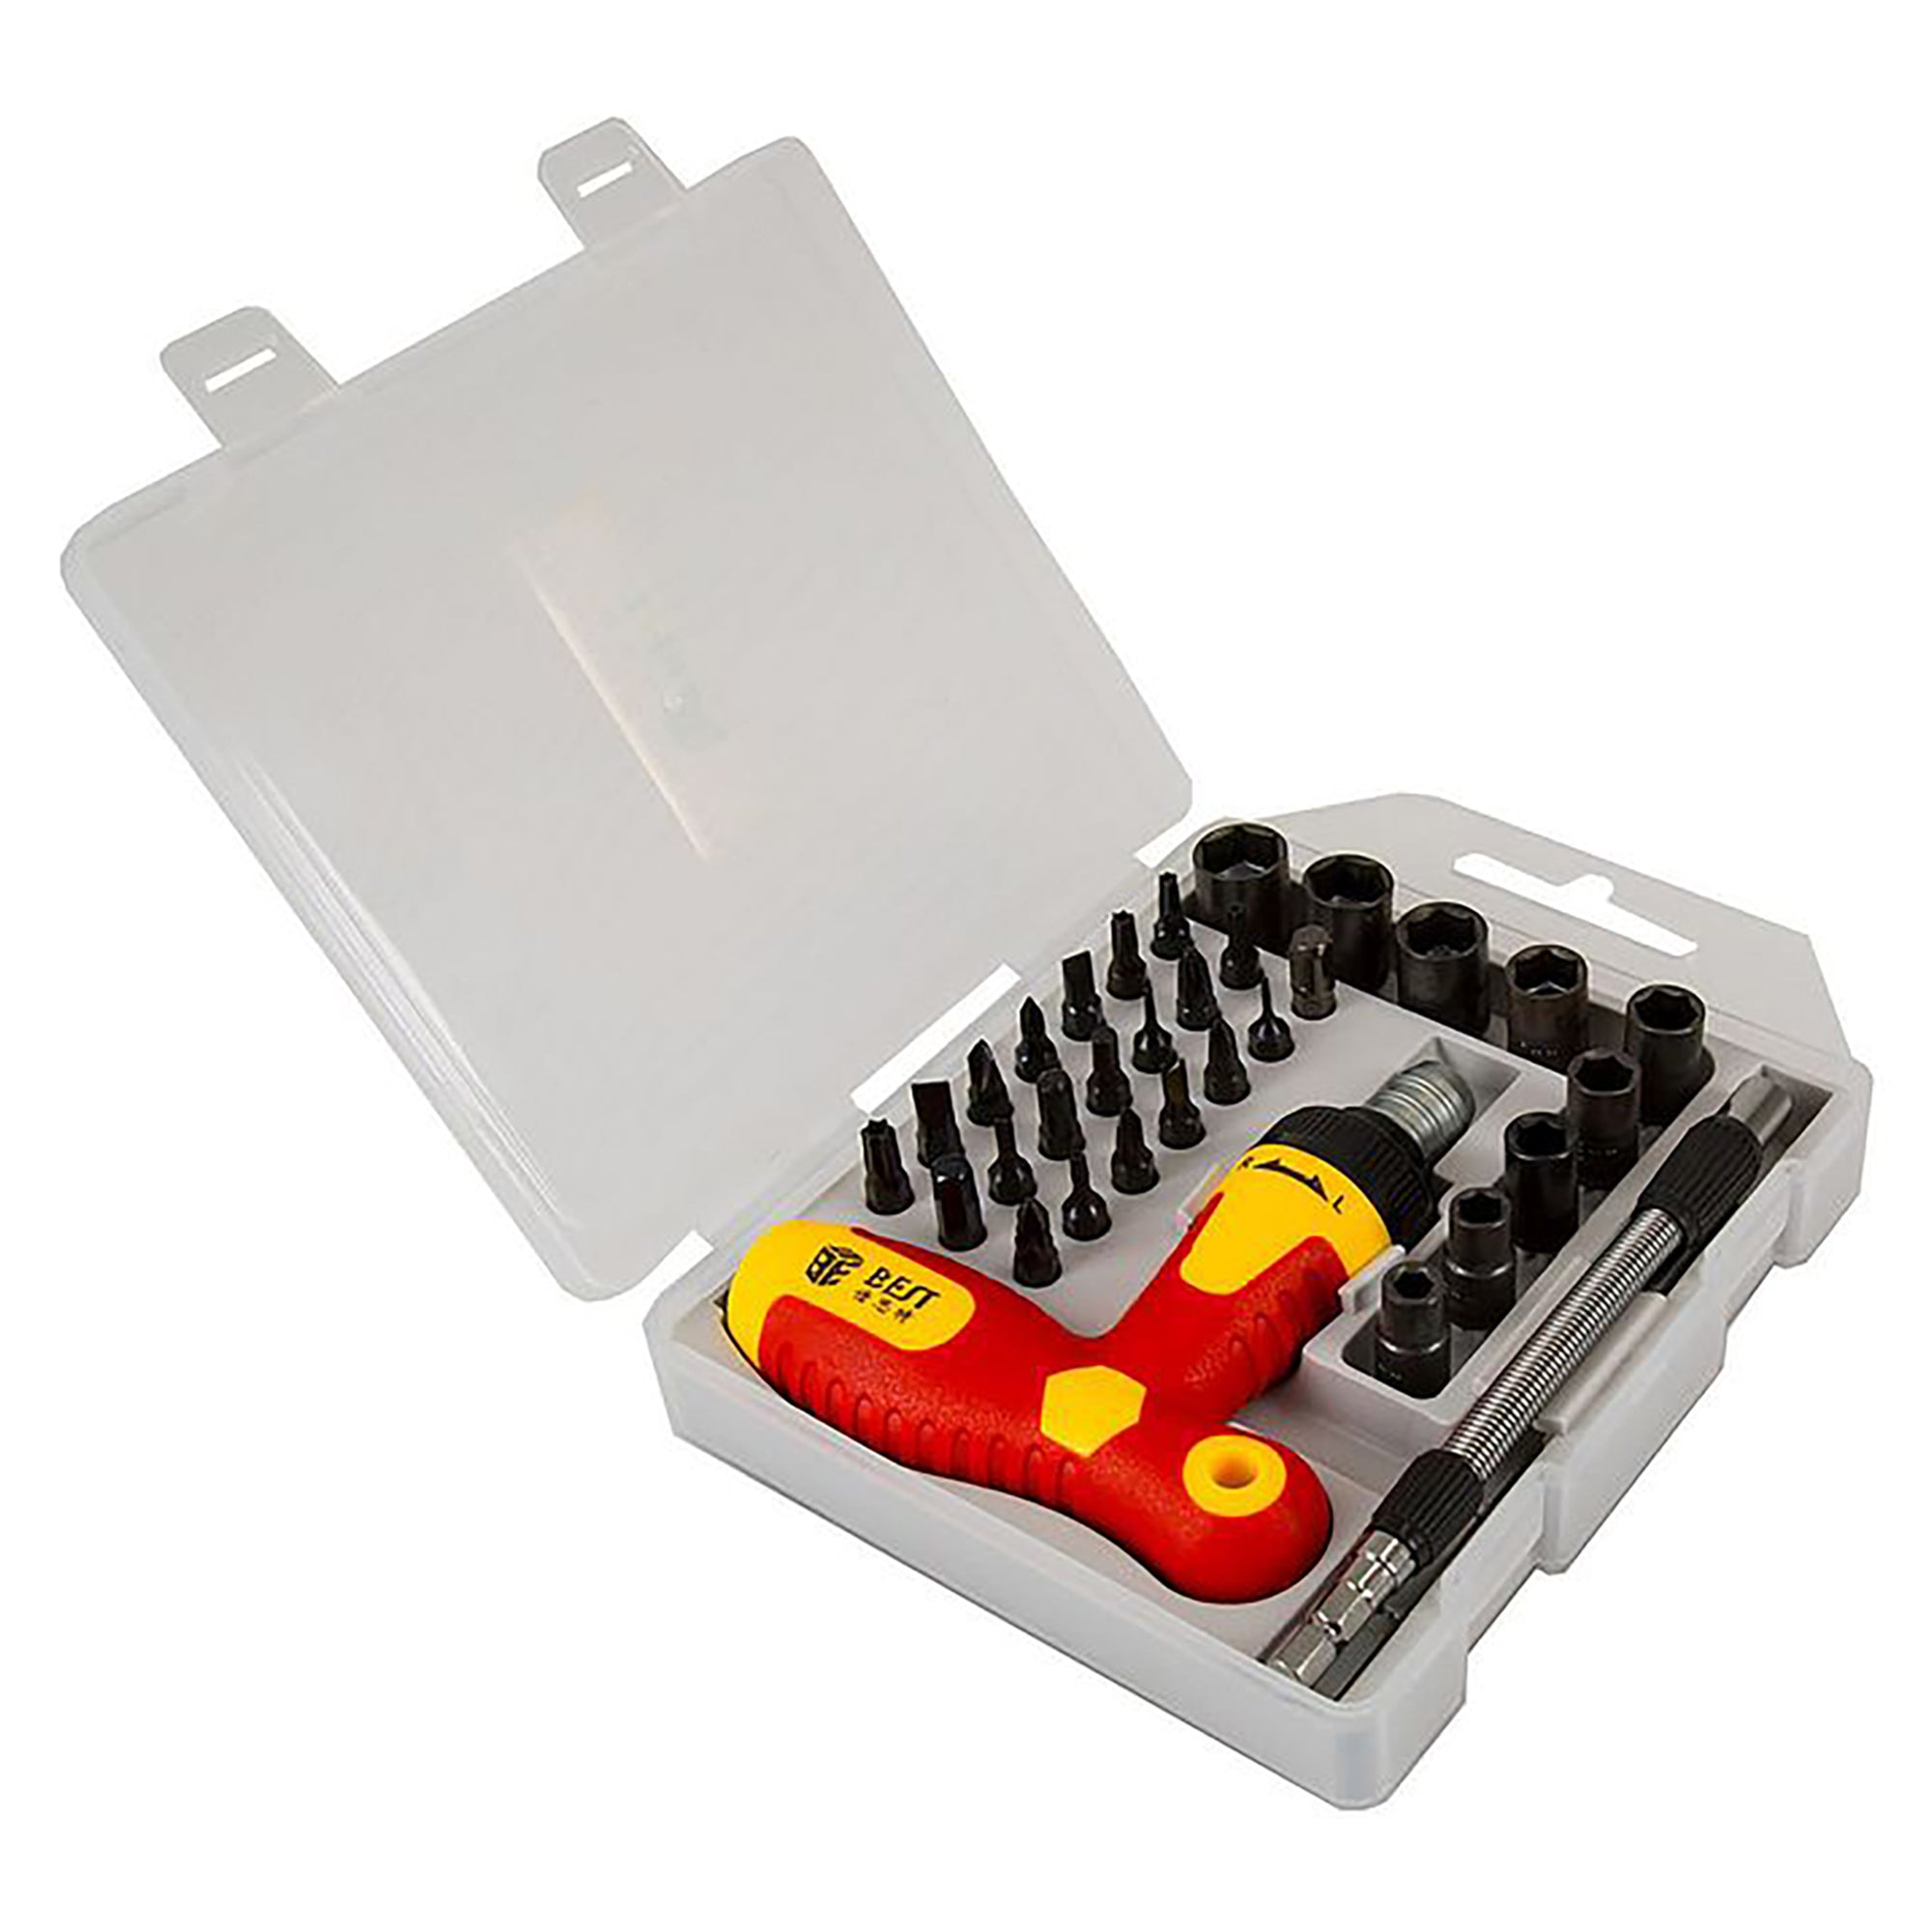 BST 33-In-1 Ratchet & Screwdriver Set with Carry Case (33 pieces)